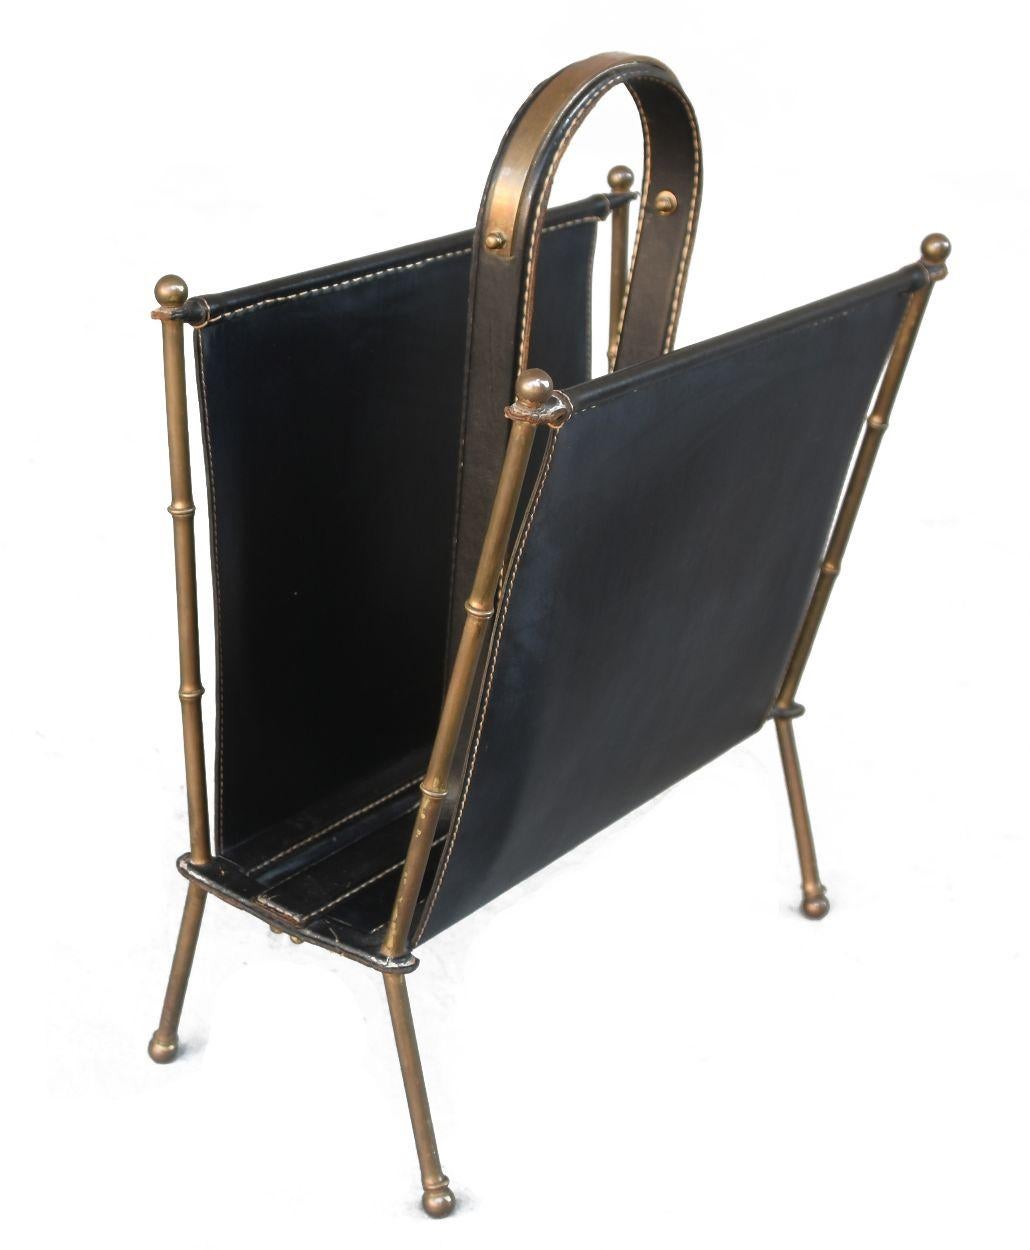 Jacques Adnet Magazine stand 1940 in brass and stitched leather.